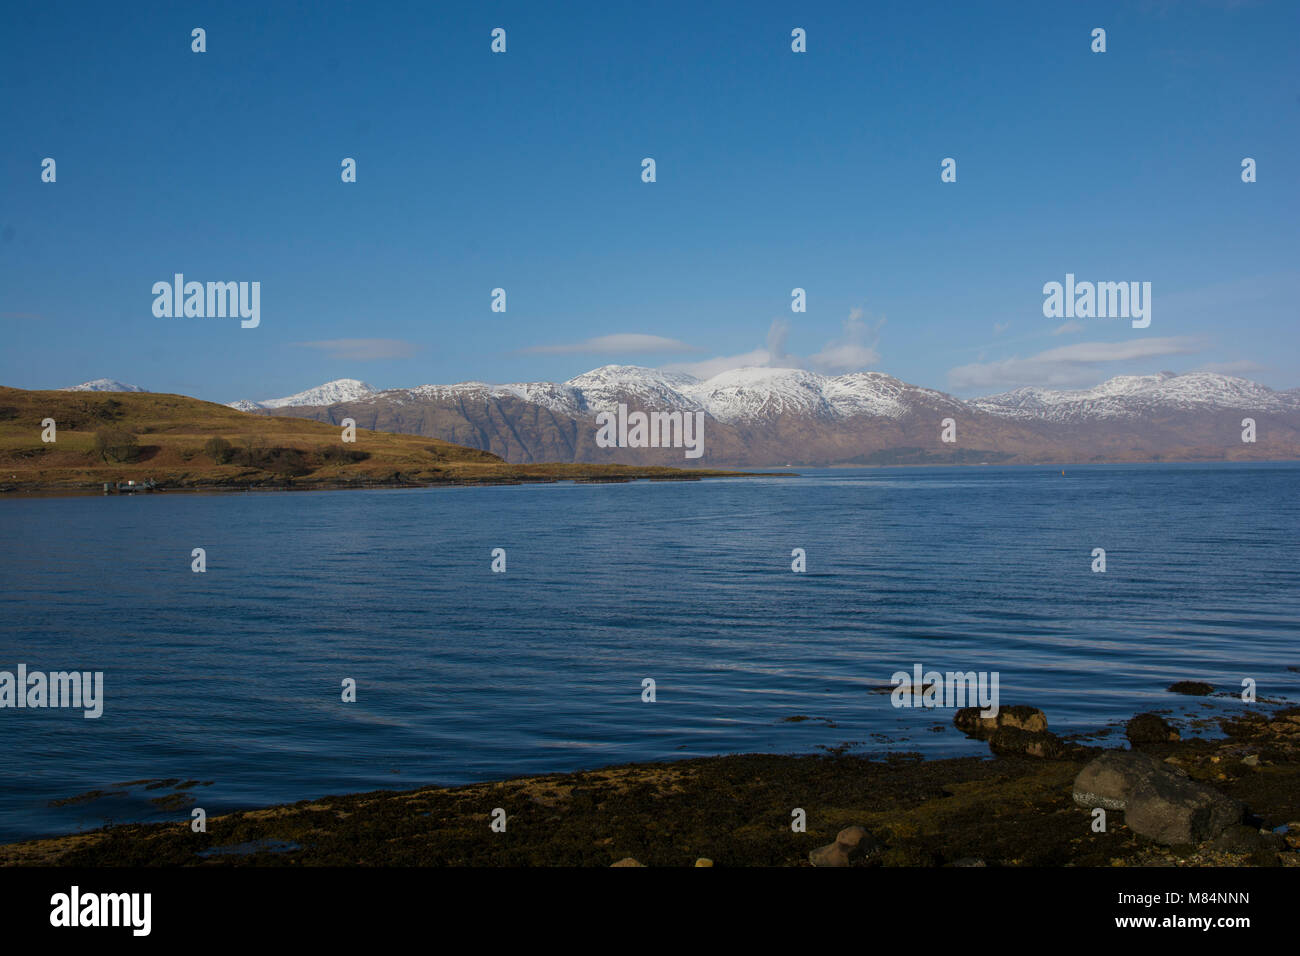 View across Loch Etive in Western Scotland in winter with snow on the hills. Stock Photo